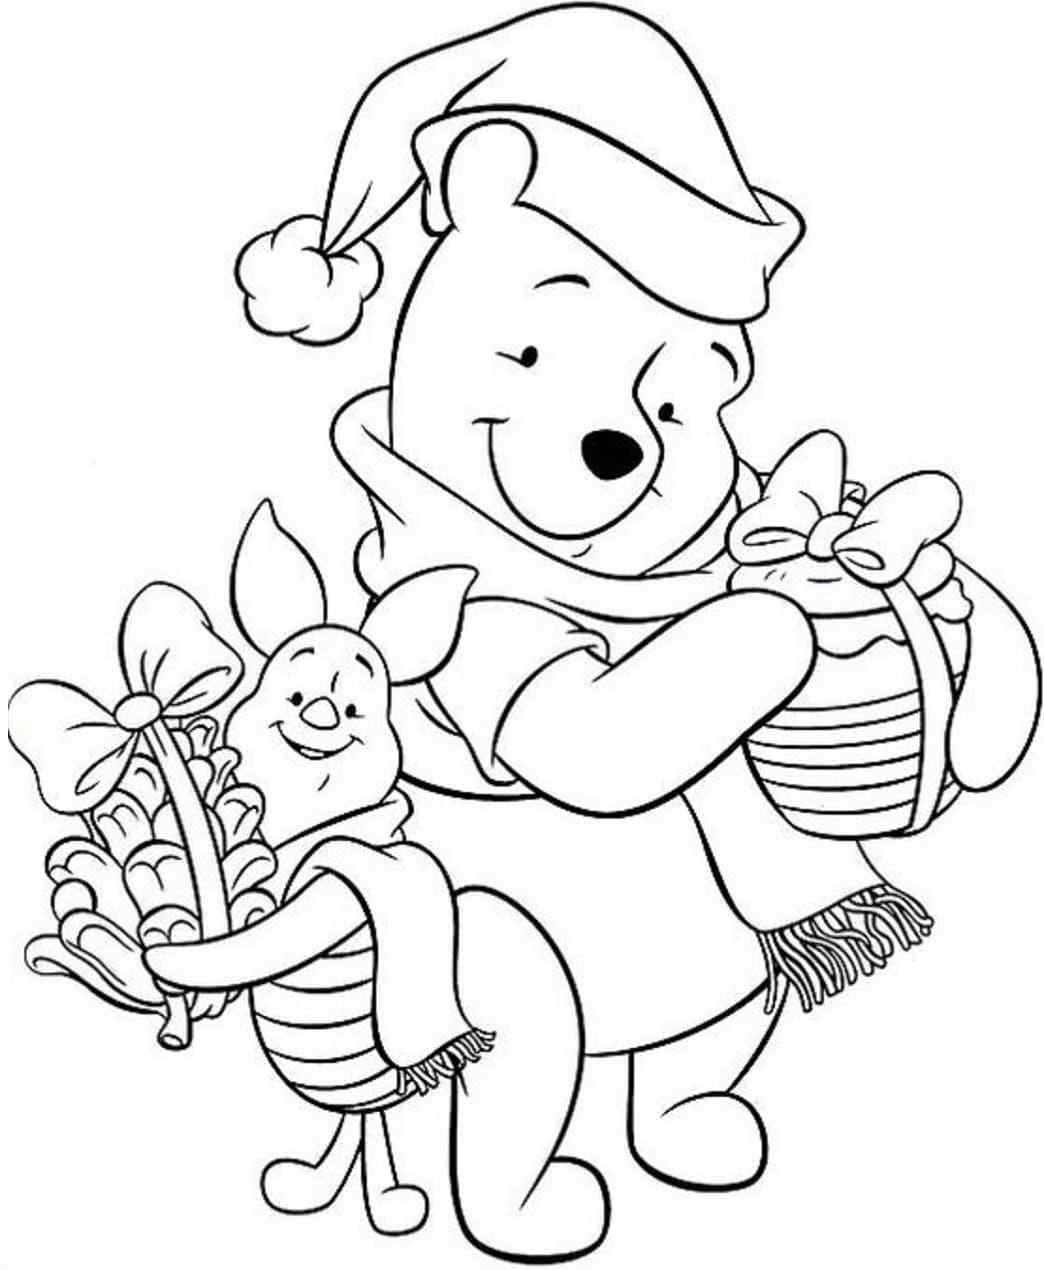 Best Friends Exchanged Gifts Coloring Page